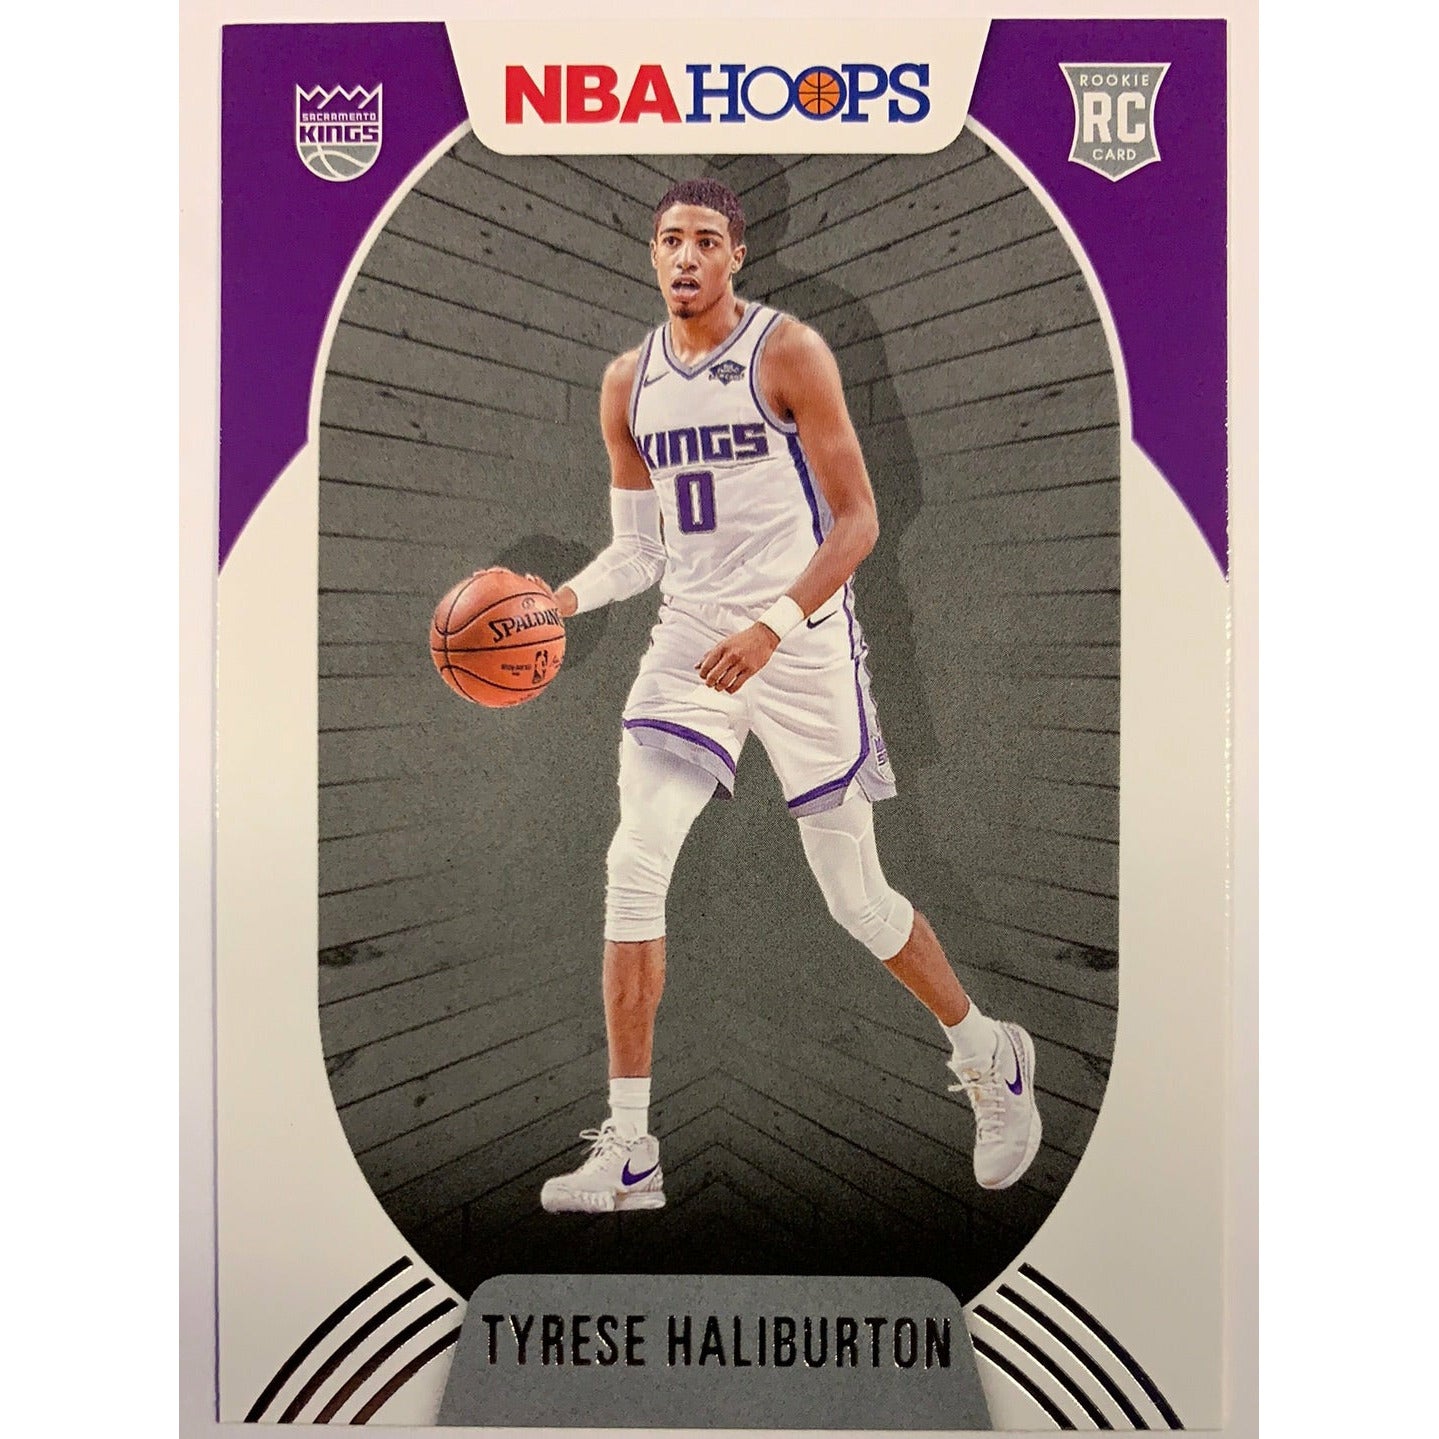  2020-21 Hoops Tyrese Haliburton RC  Local Legends Cards & Collectibles